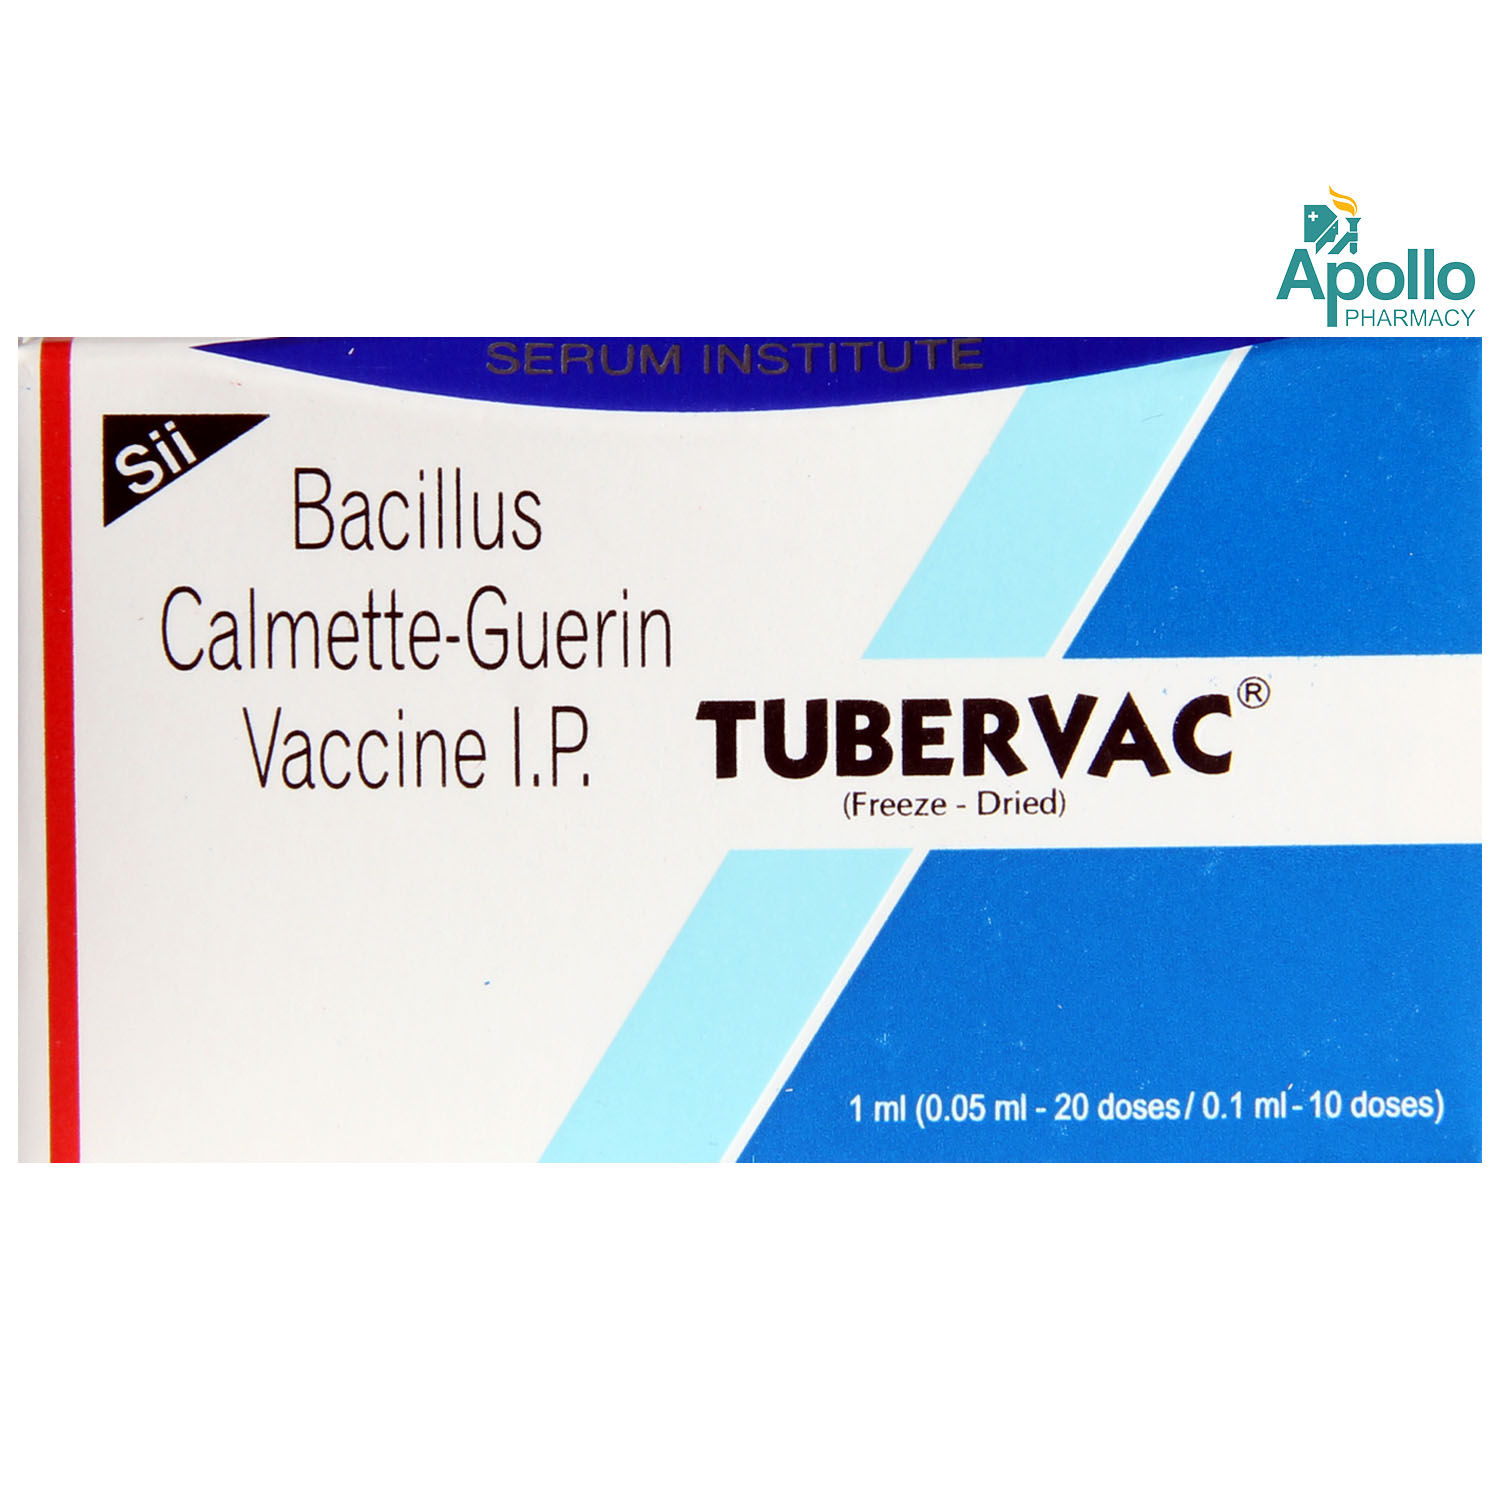 Buy Tubervac Injection 1ml Online